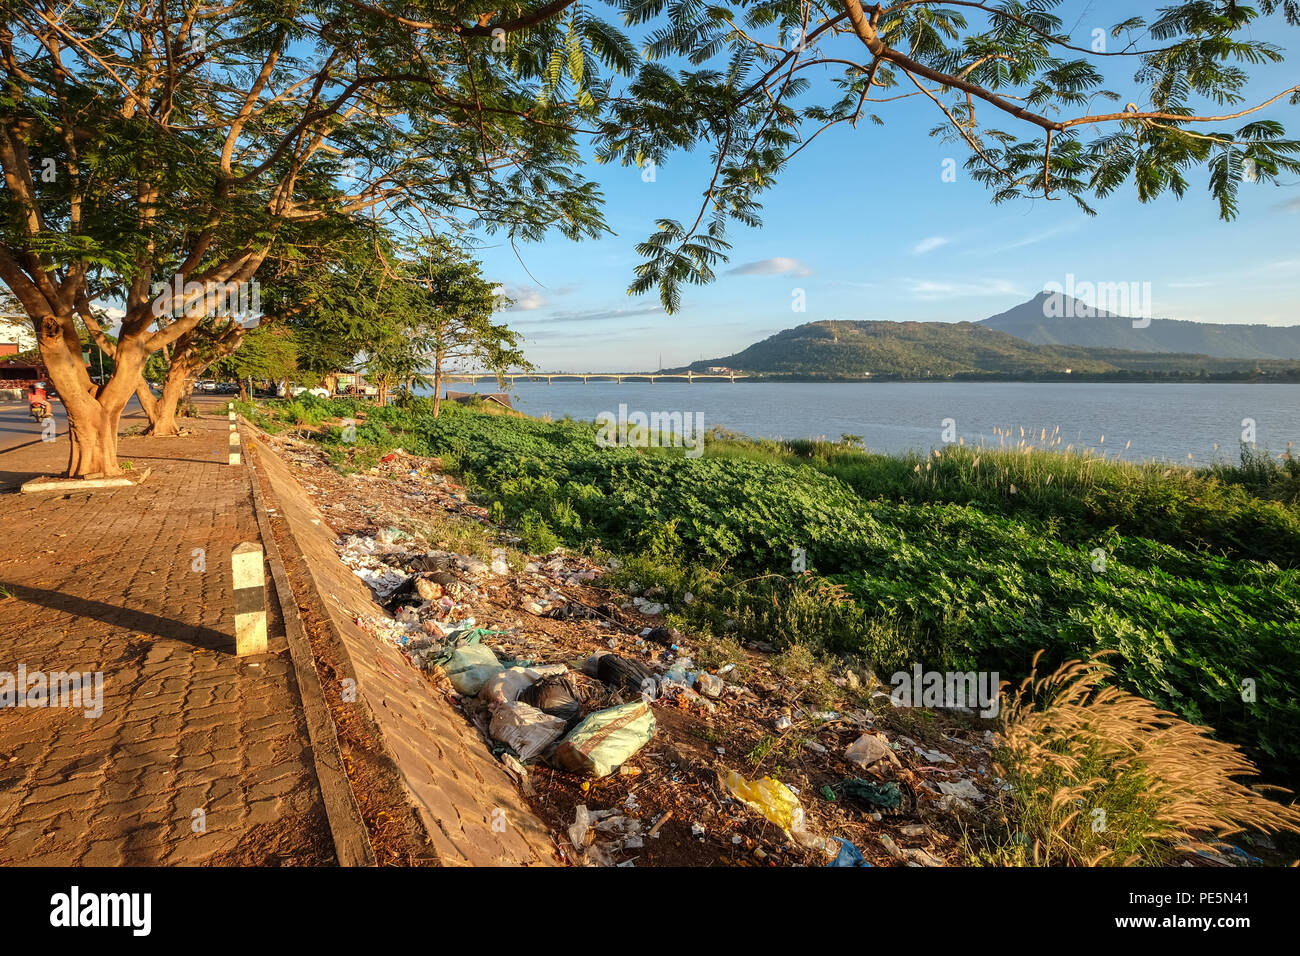 Plastic litter on the banks of the Mekong River in Pakse, Laos Stock Photo